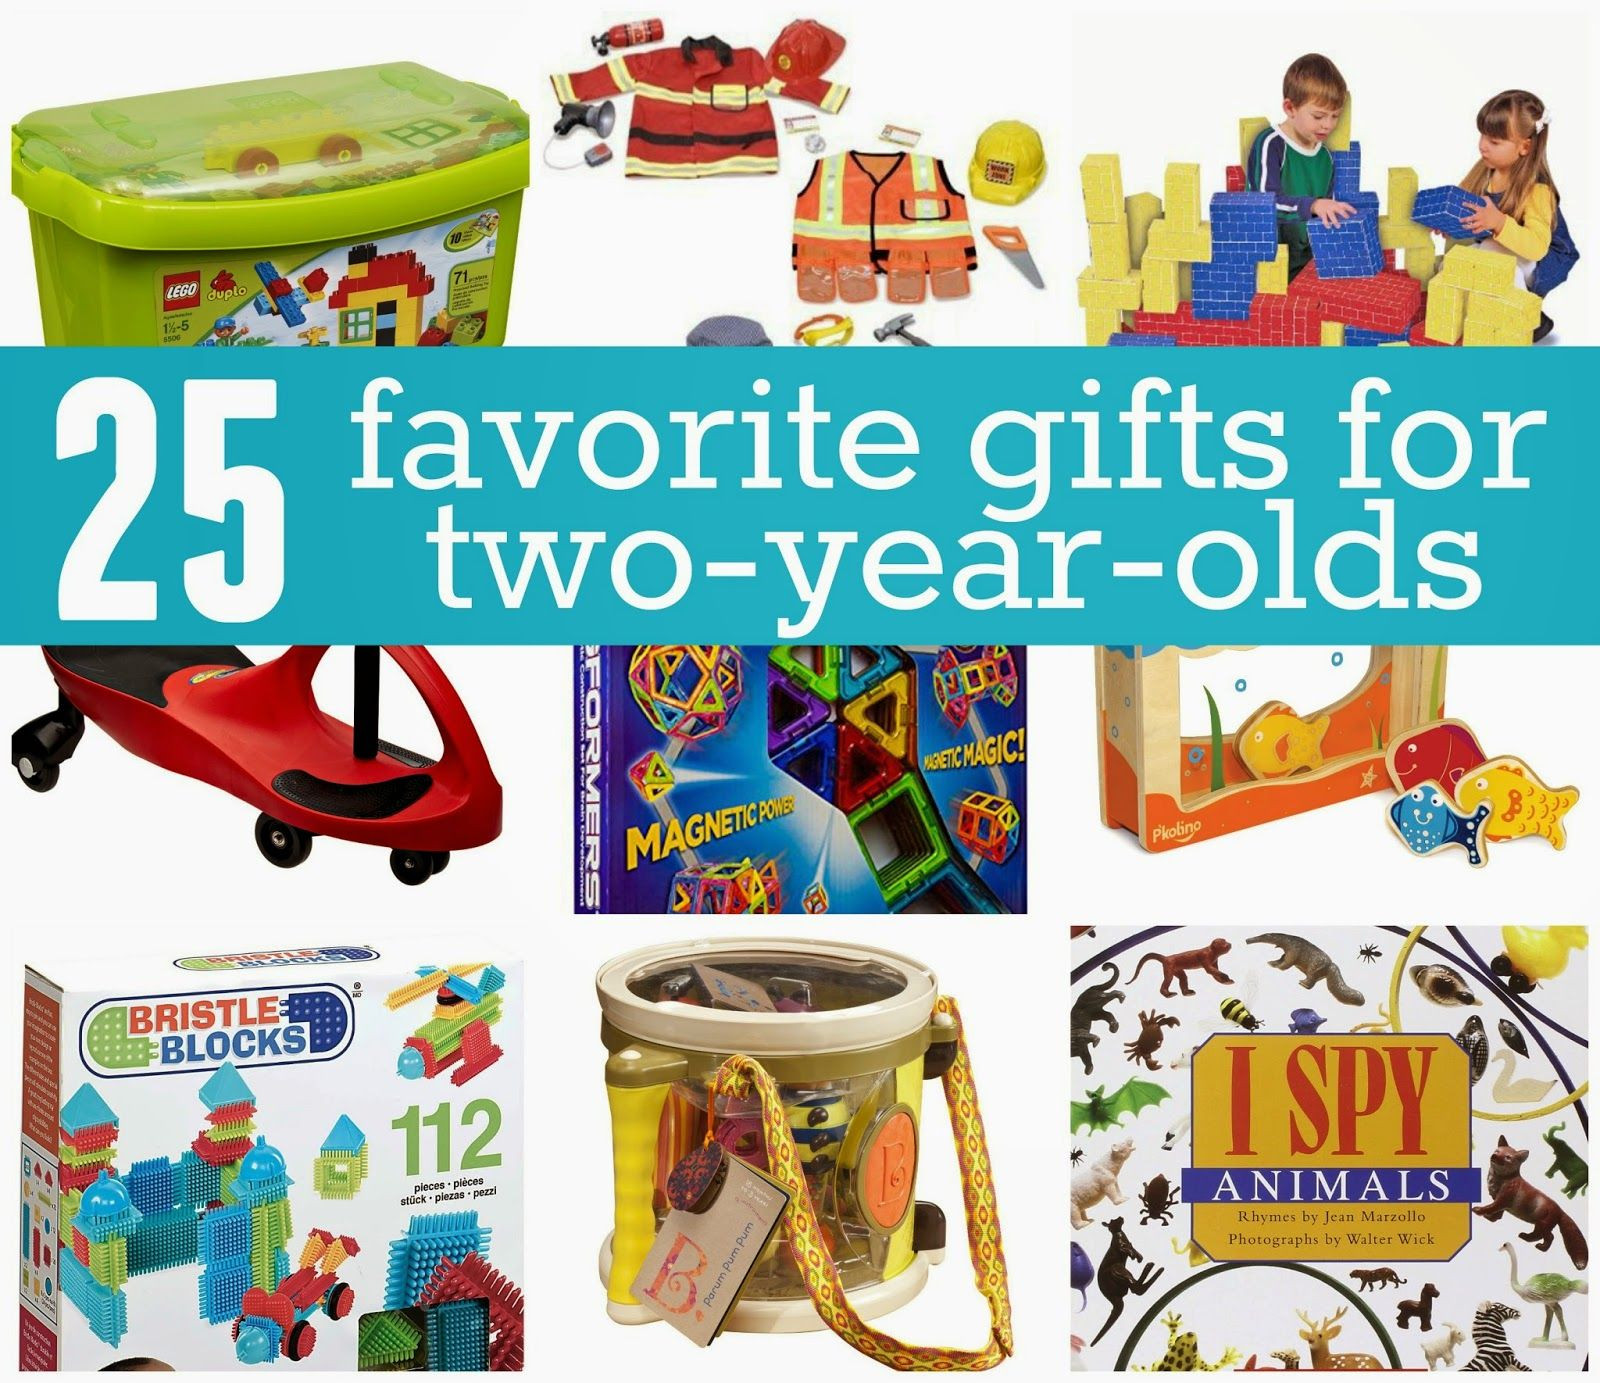 Valentine Gift Ideas For 2 Year Old Boy
 Favorite Gifts for 2 Year Olds